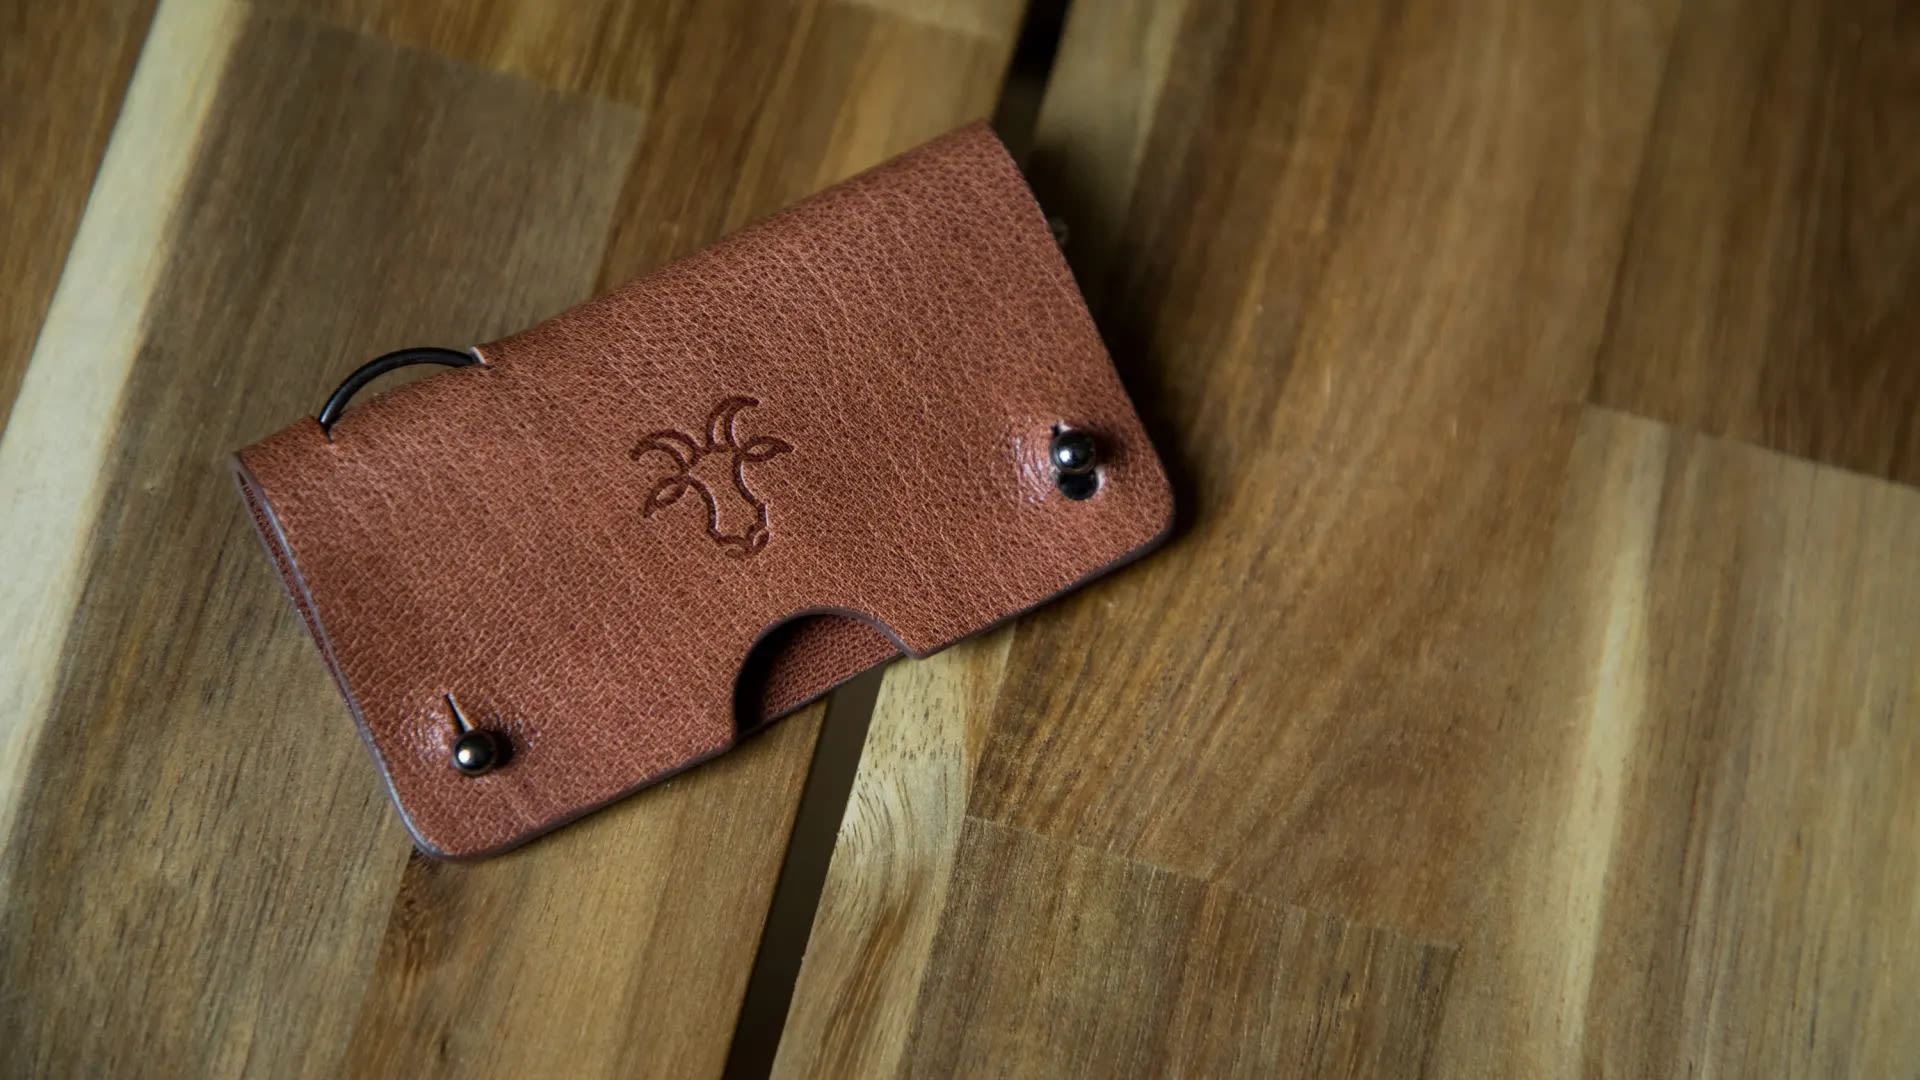 A brown leather key wrap on a wooden background